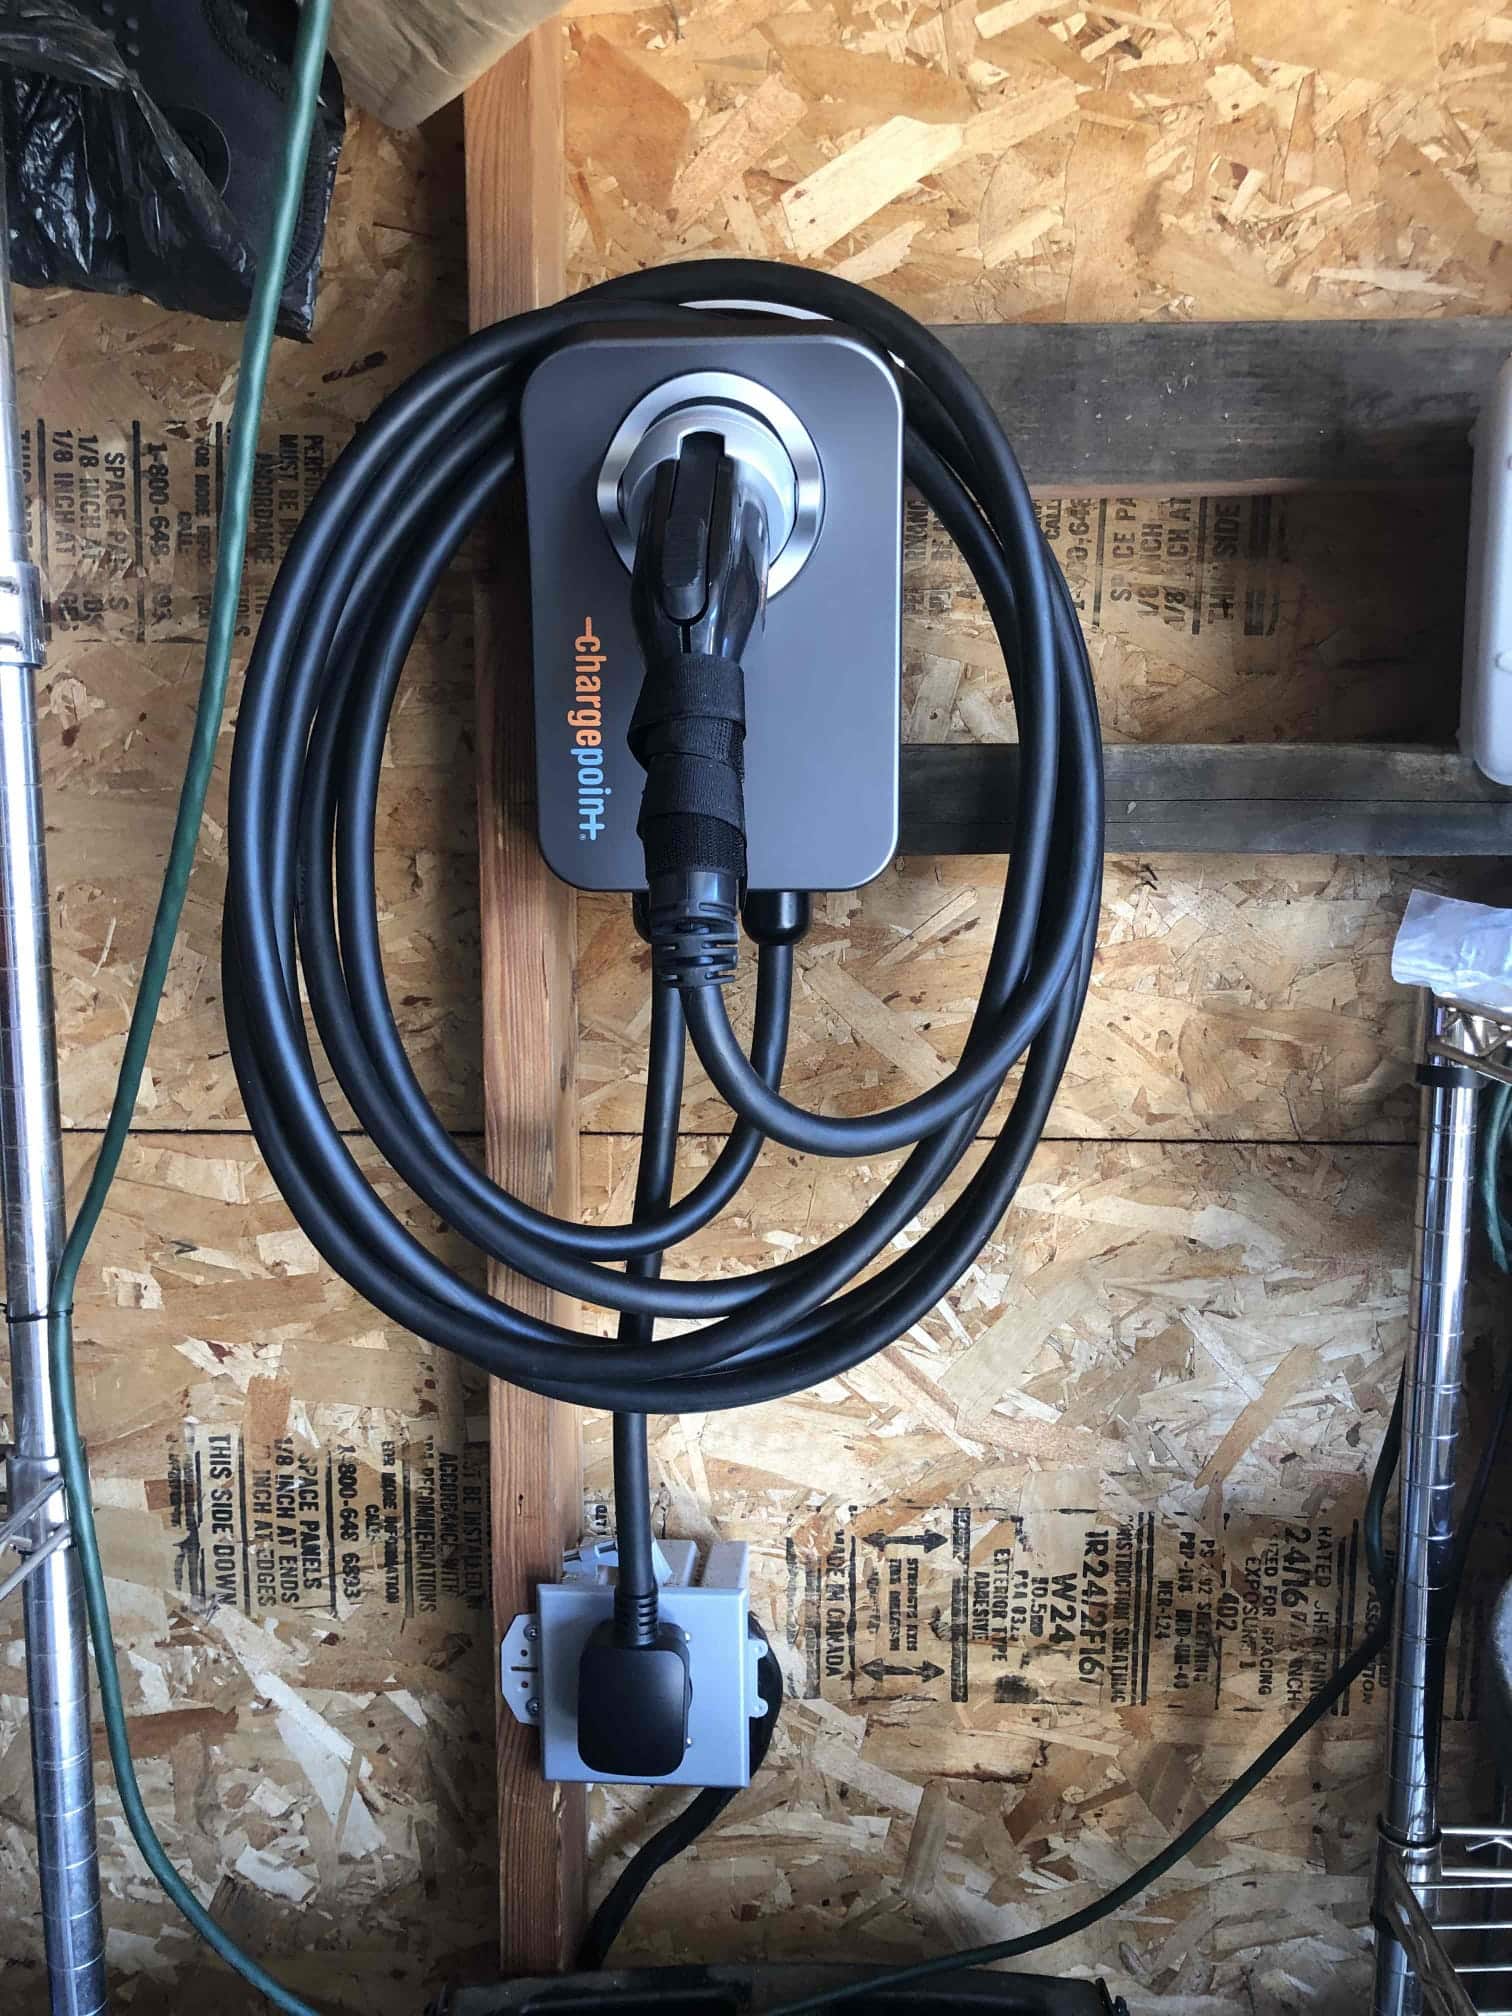 Chargepoint EV charger installation in Spokane